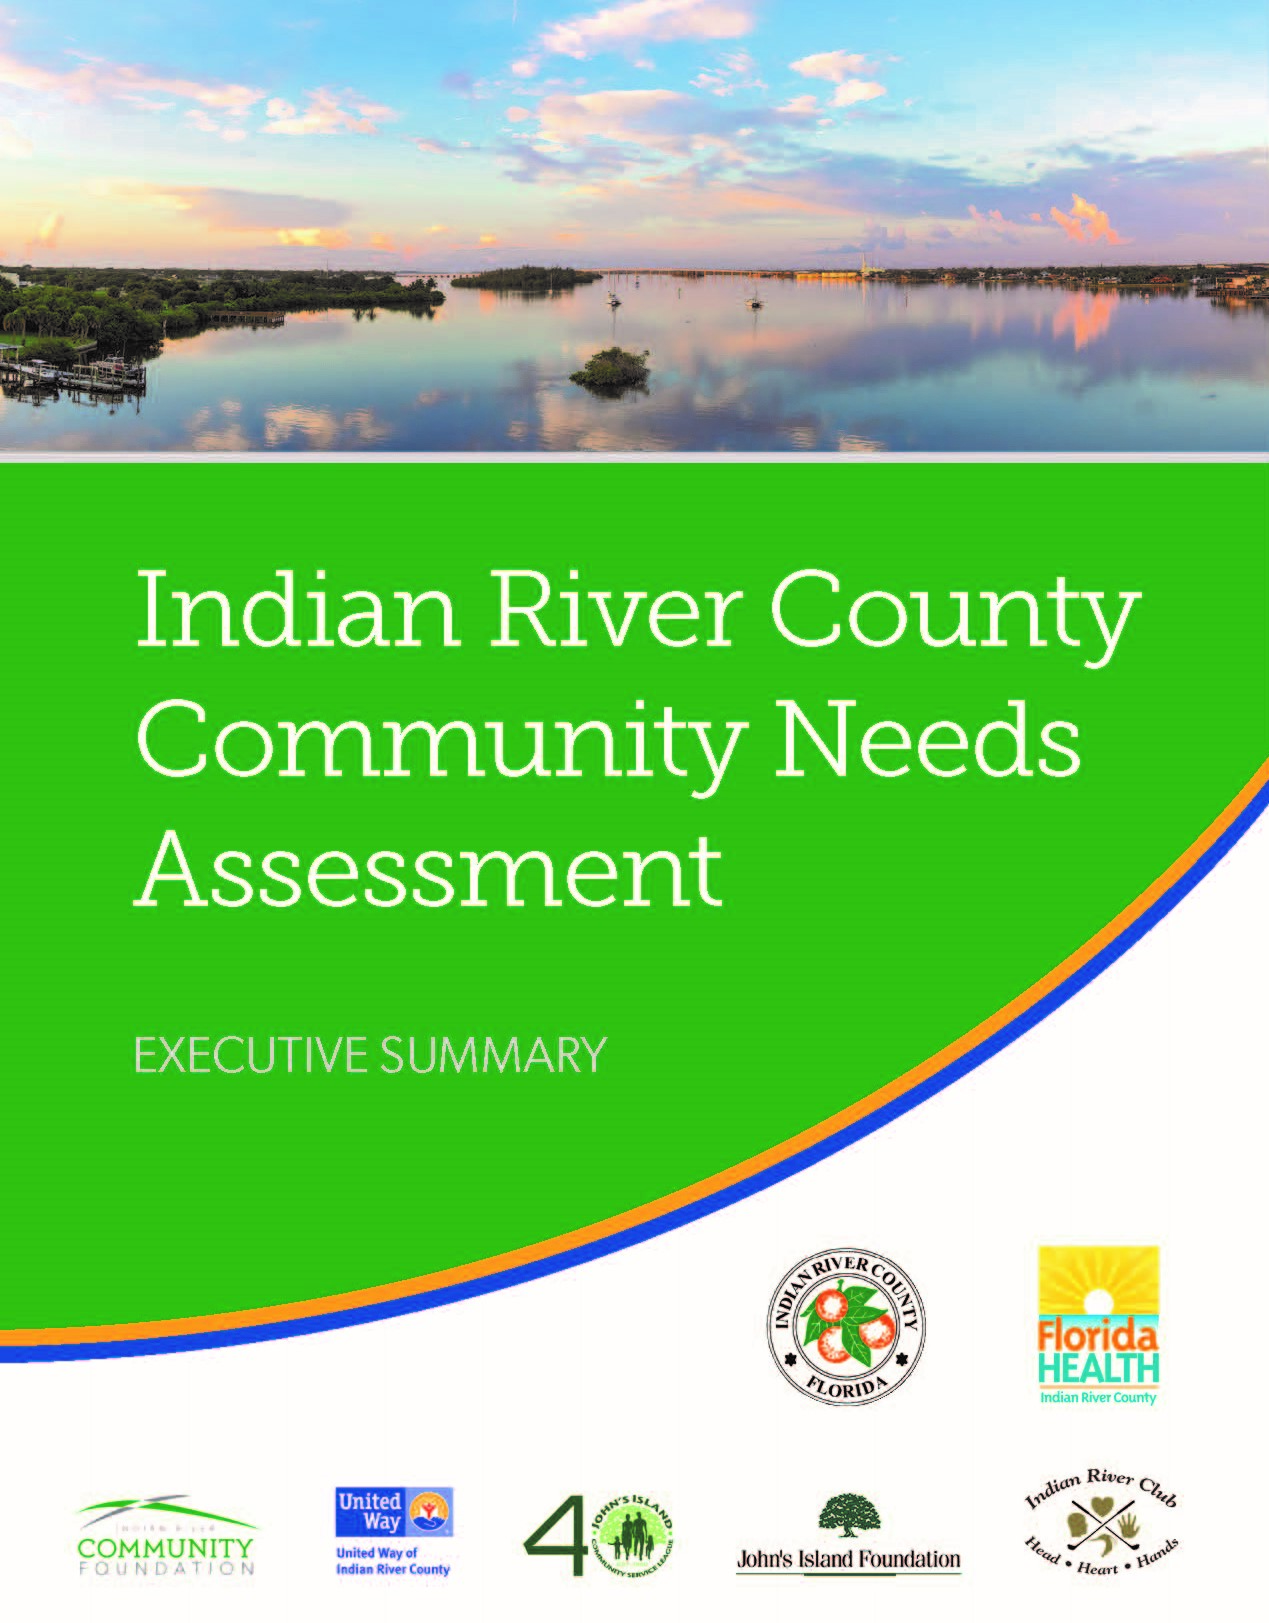 Community Needs Assessment says some IRC residents' lives can be improved through private, public resources